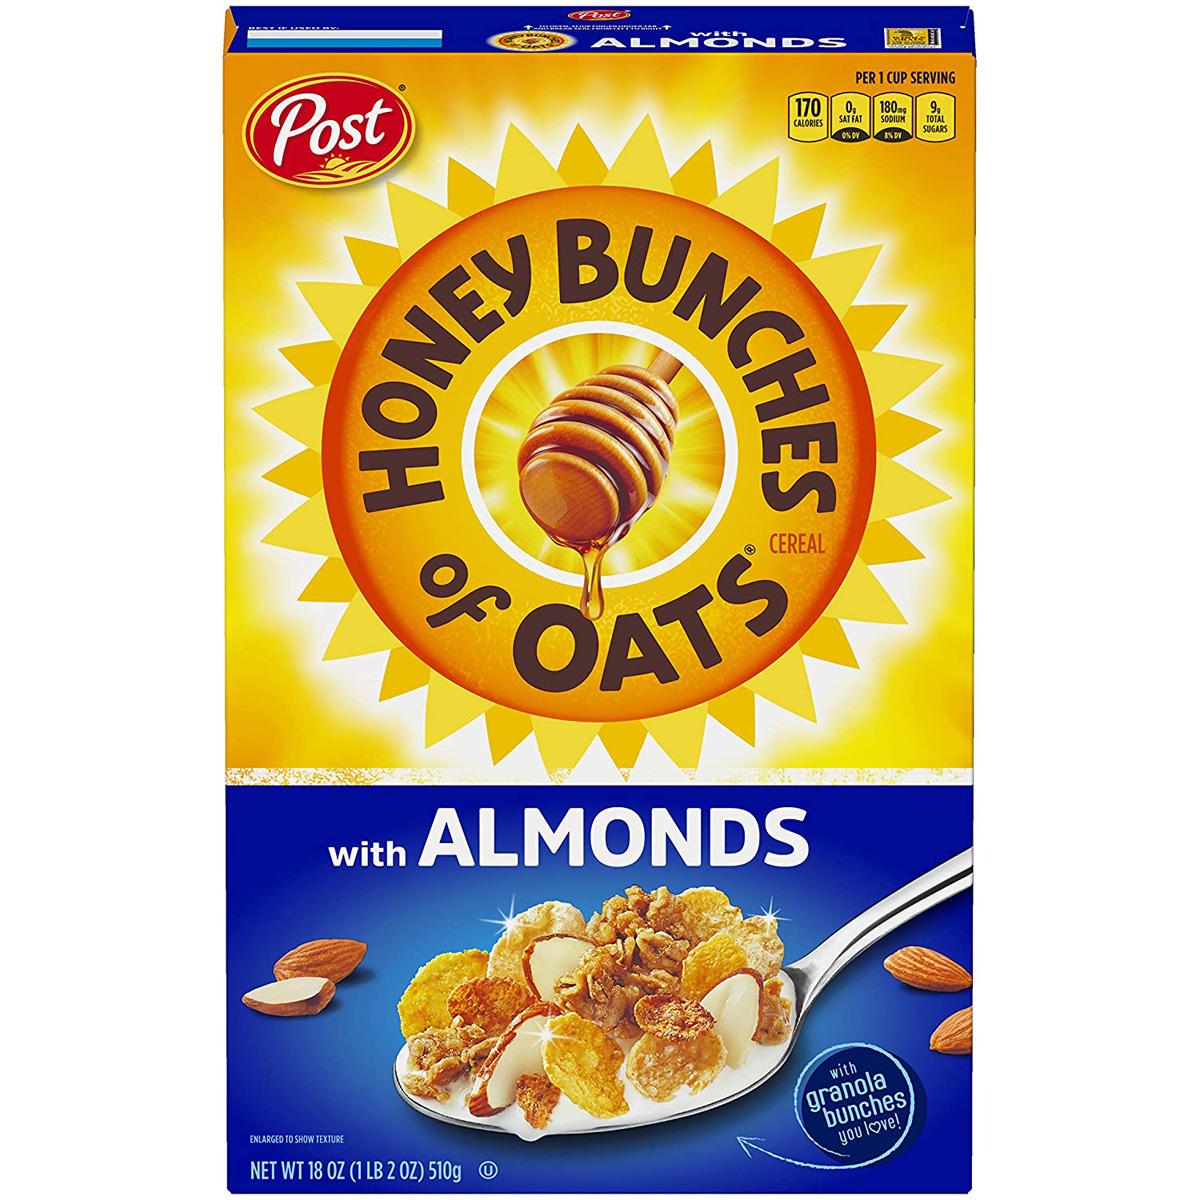 Honey Bunches of Oats with Almonds Cereal for $2.35 Shipped